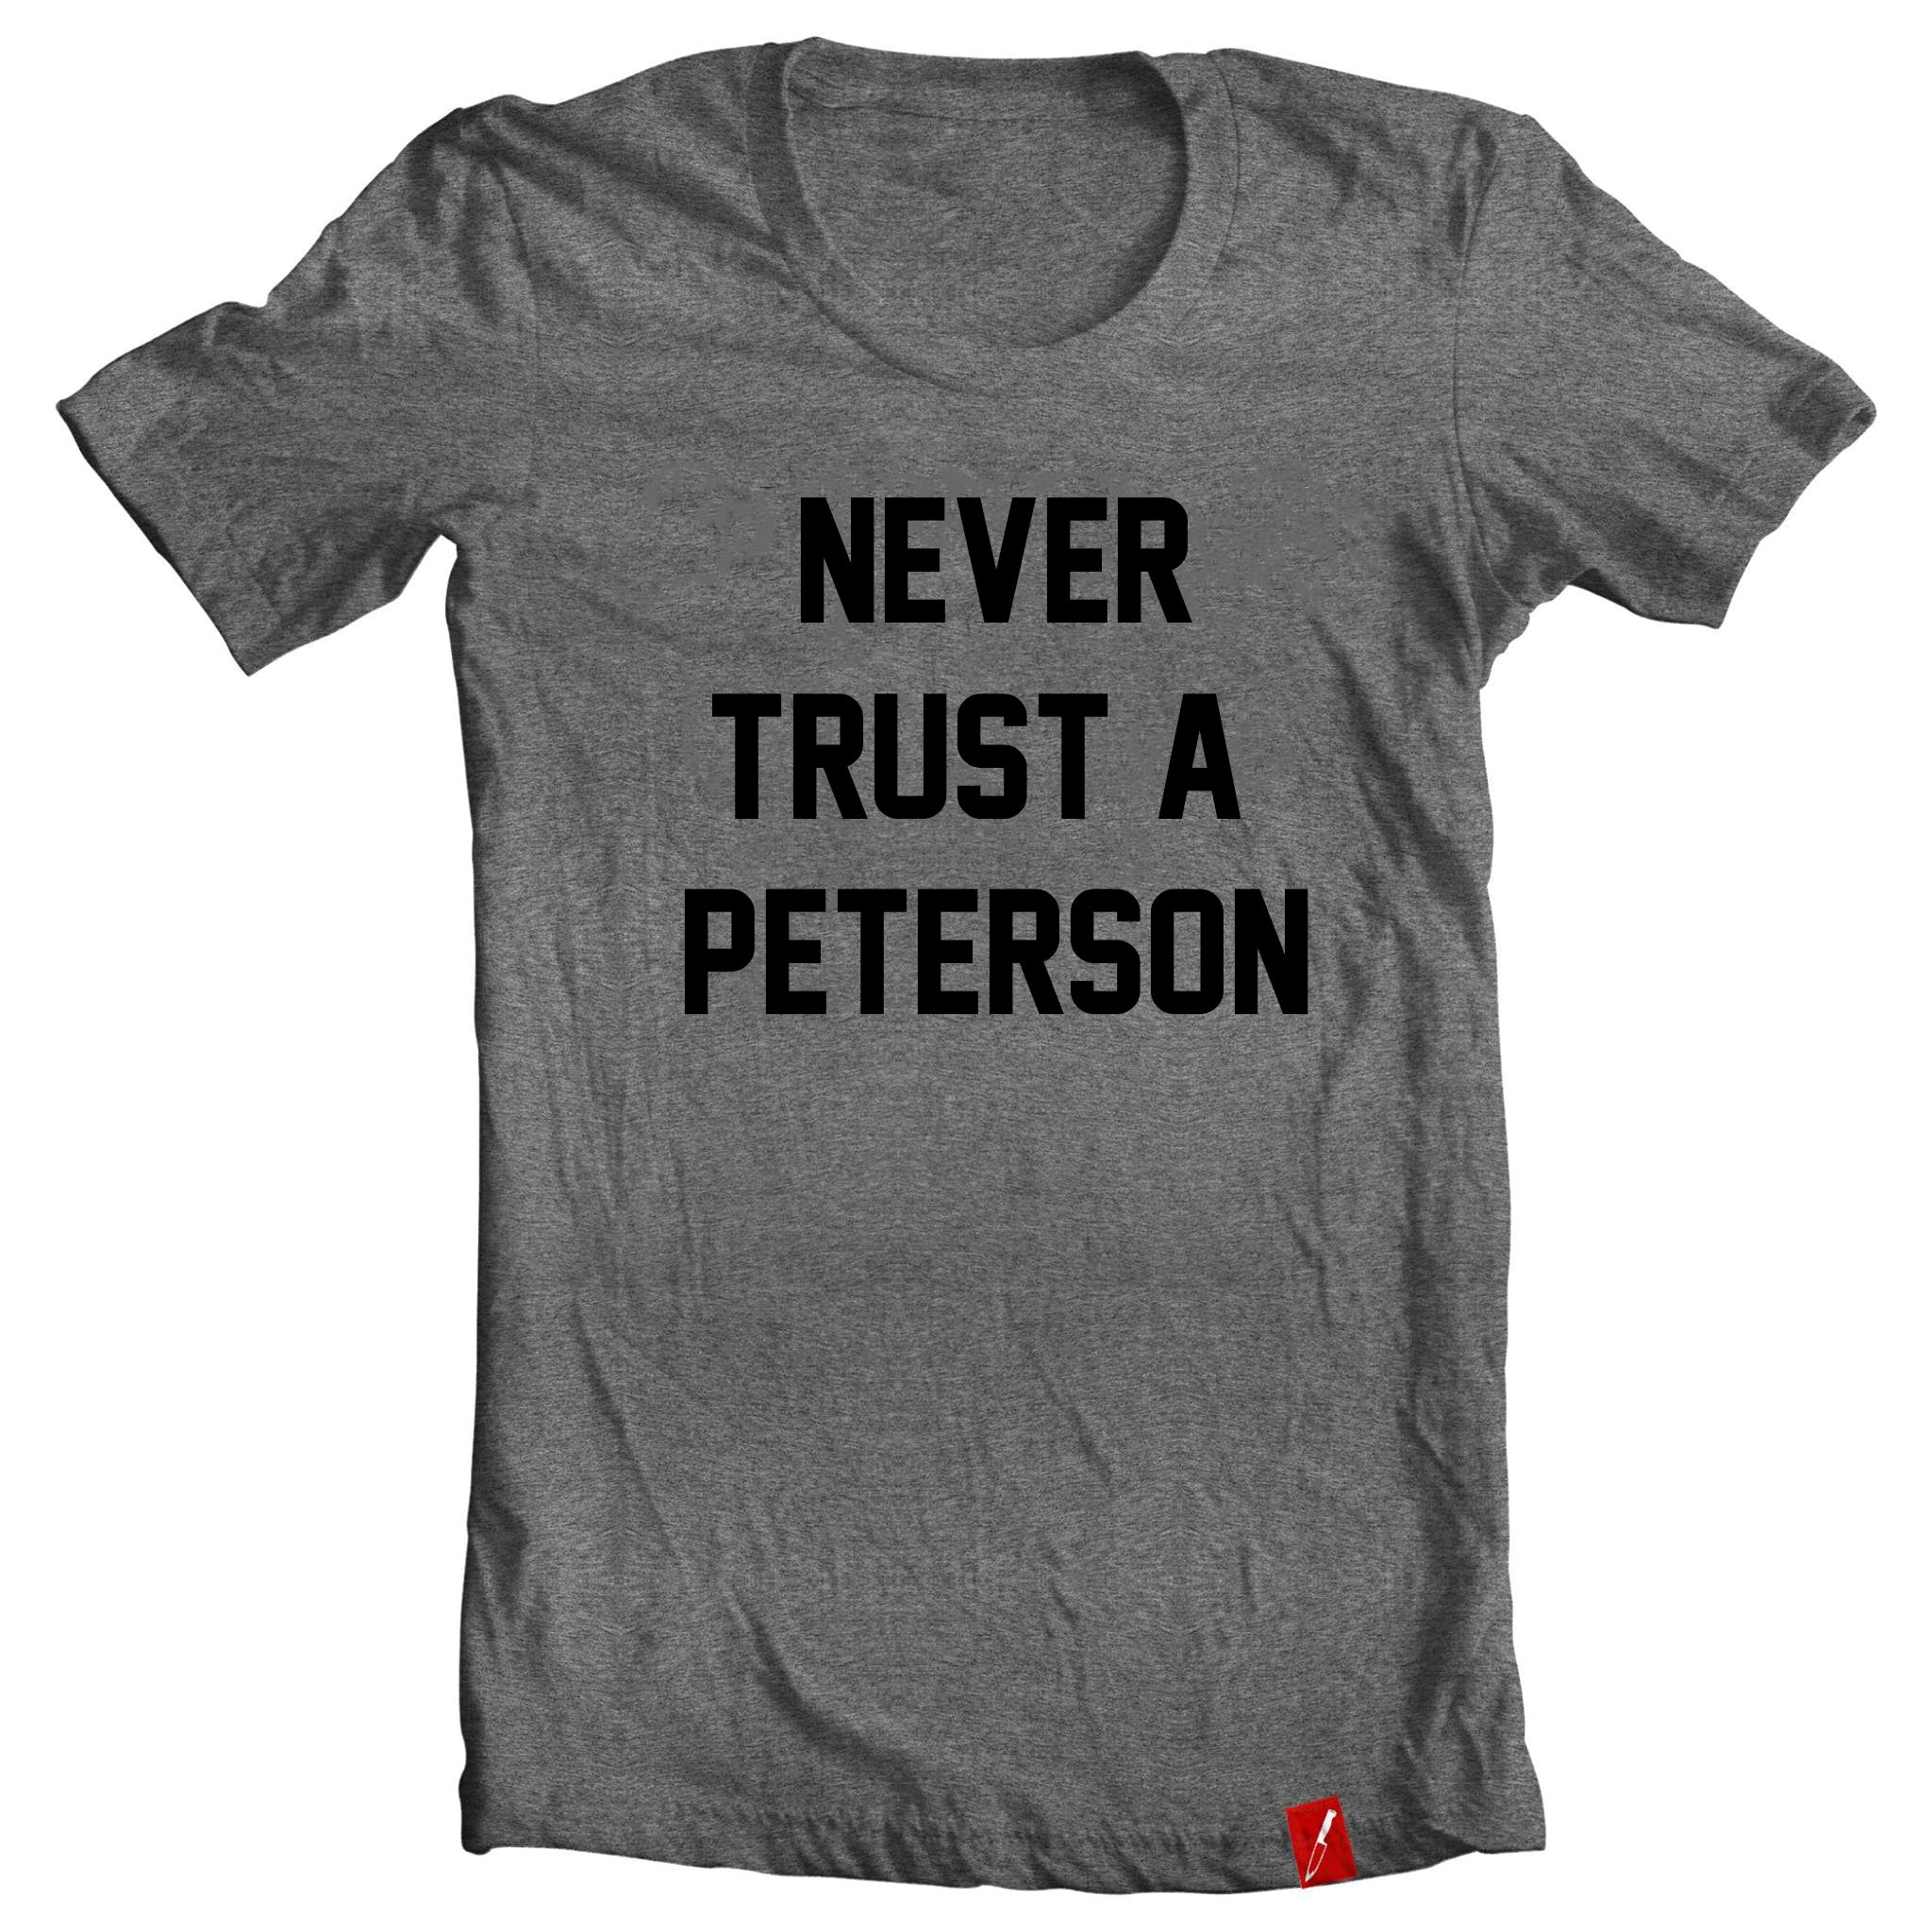 Never trust a Peterson